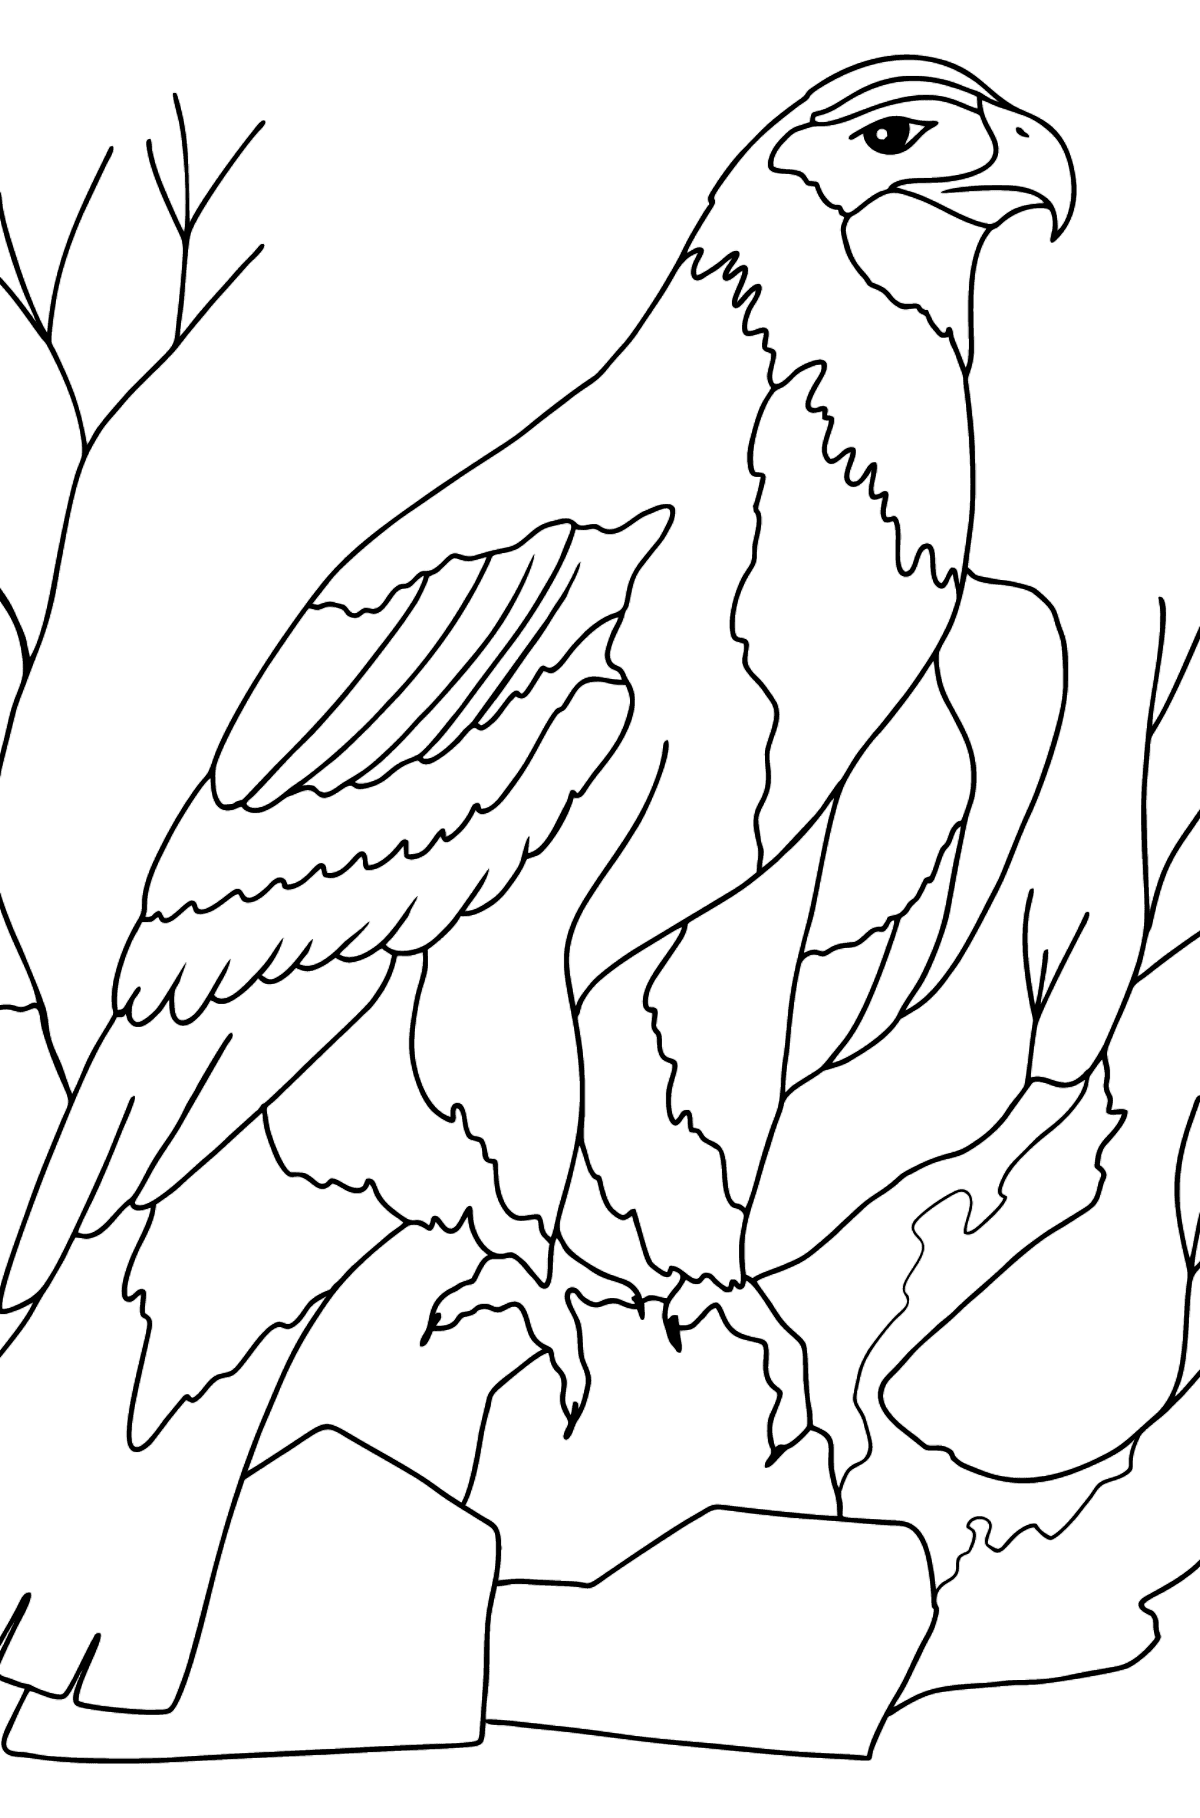 Coloring Page - An Eagle is Looking for Prey - Coloring Pages for Kids